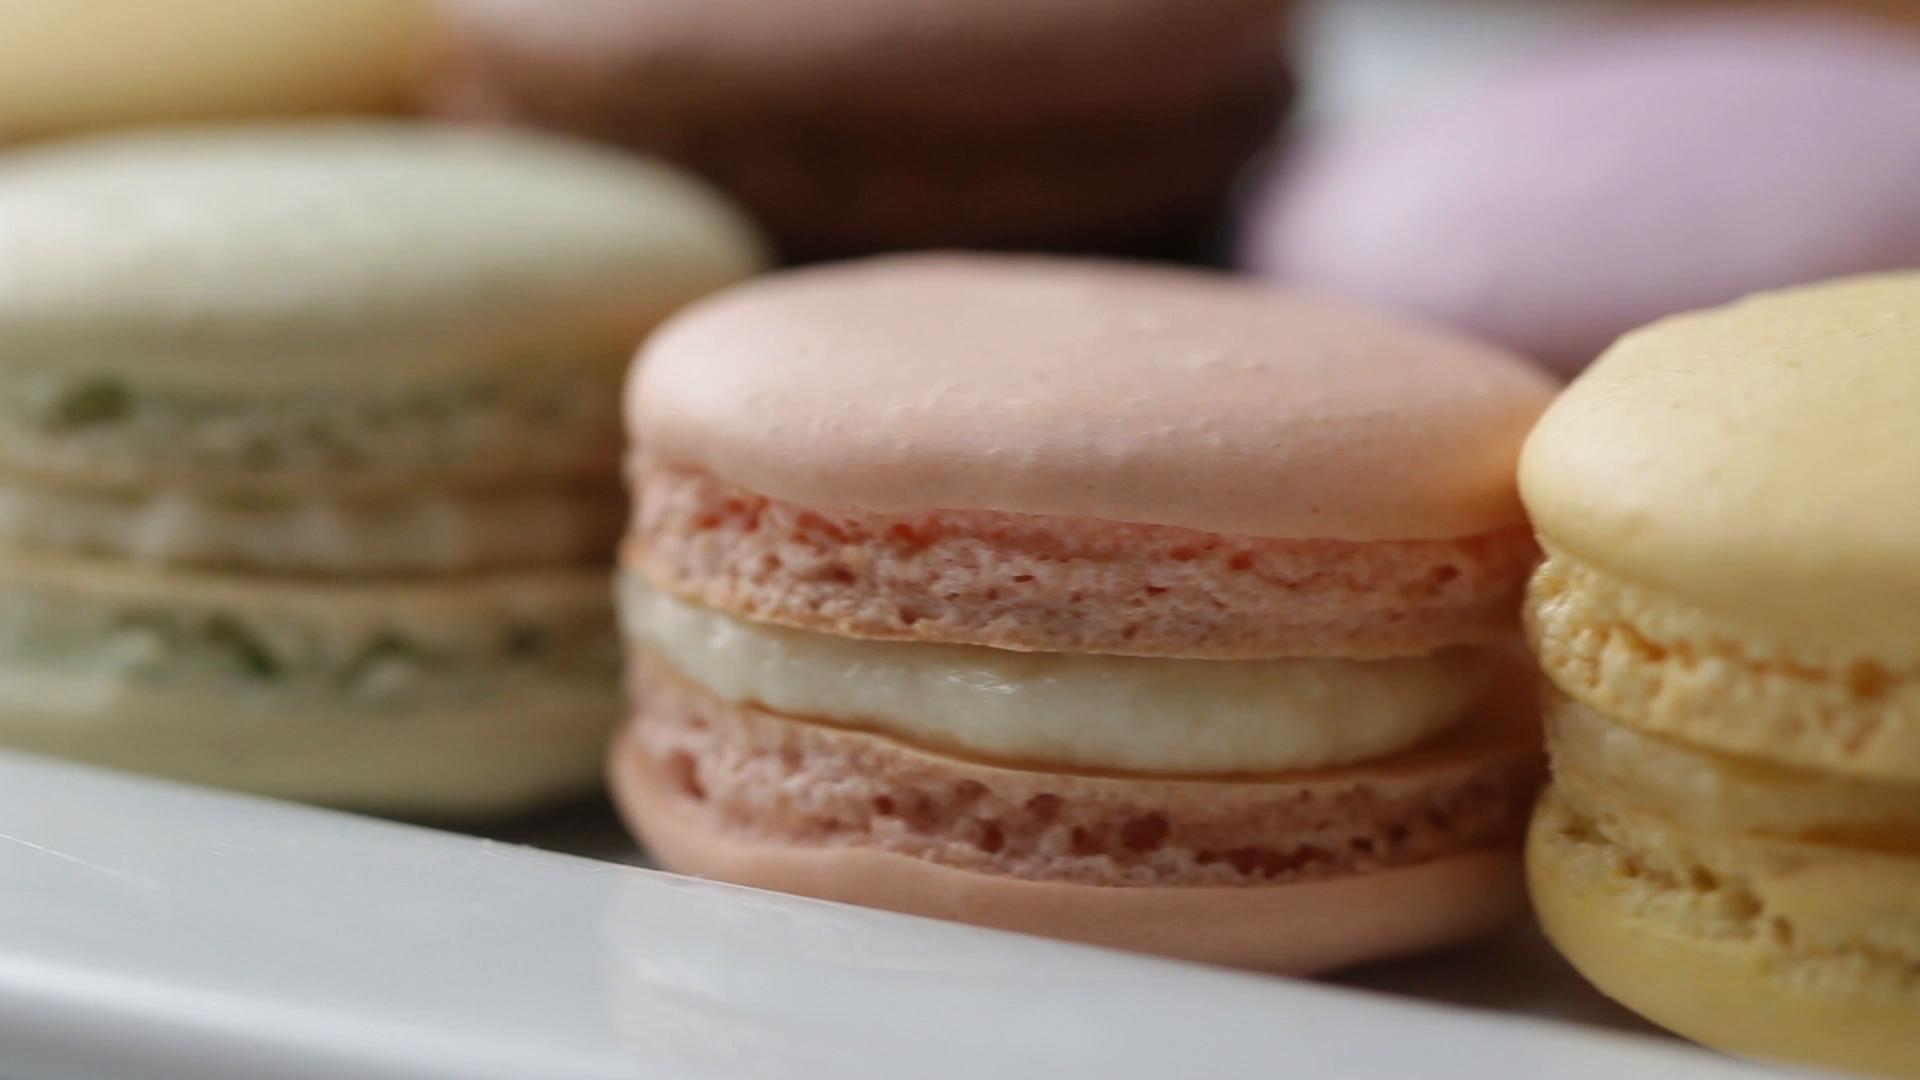 How To Make Macarons Recipe by Tasty_image